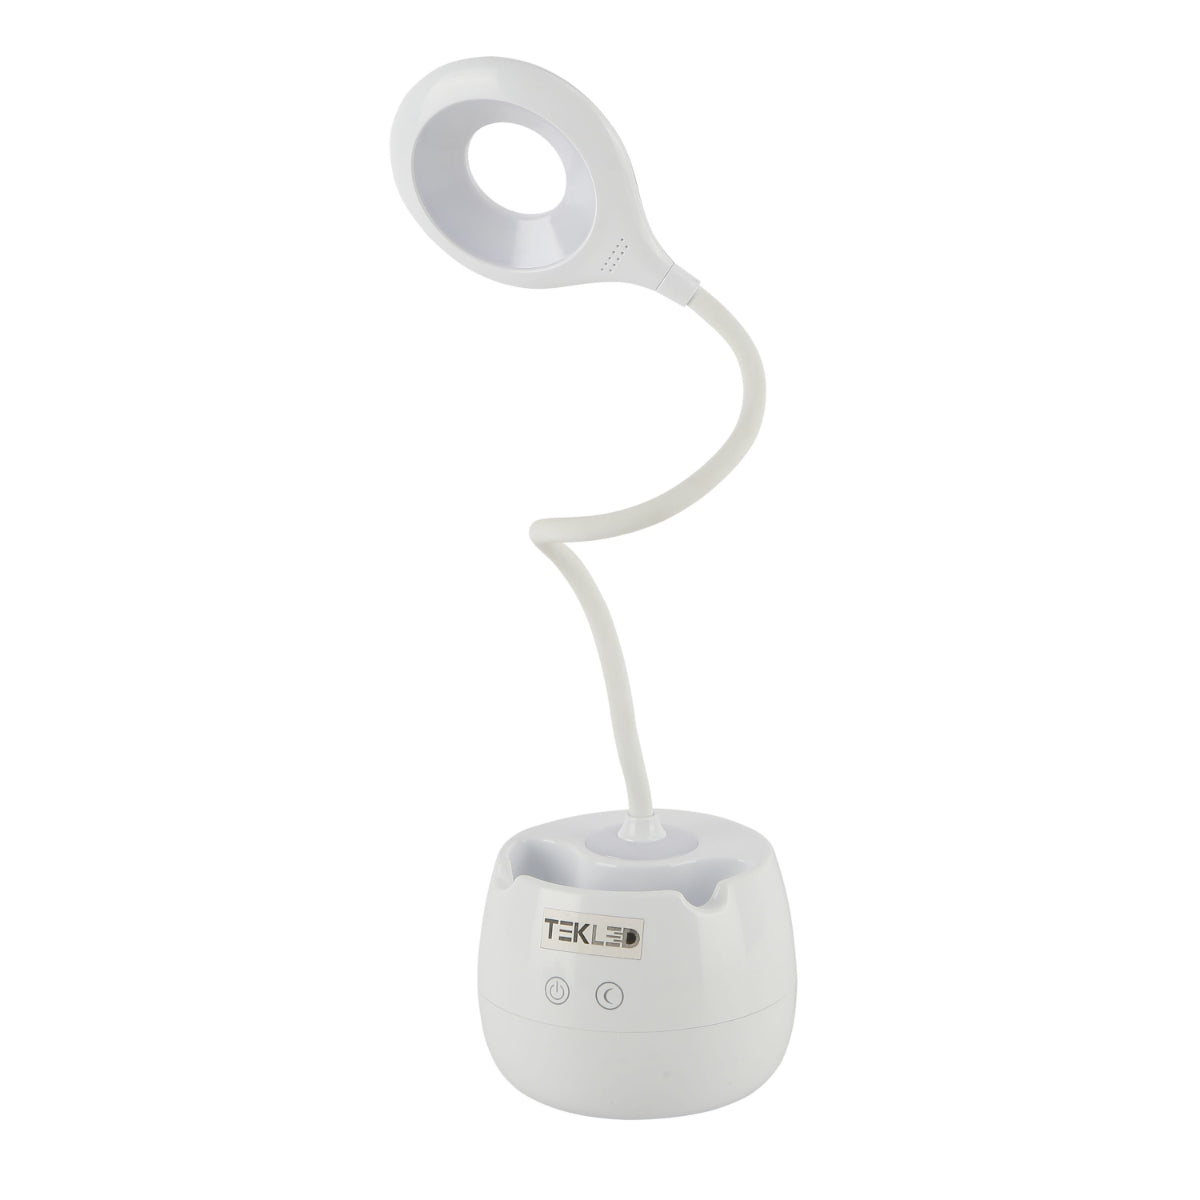 Main image of Multifunctional Rechargeable LED Ring Desk Lamp with Pencil Holder 130-03760